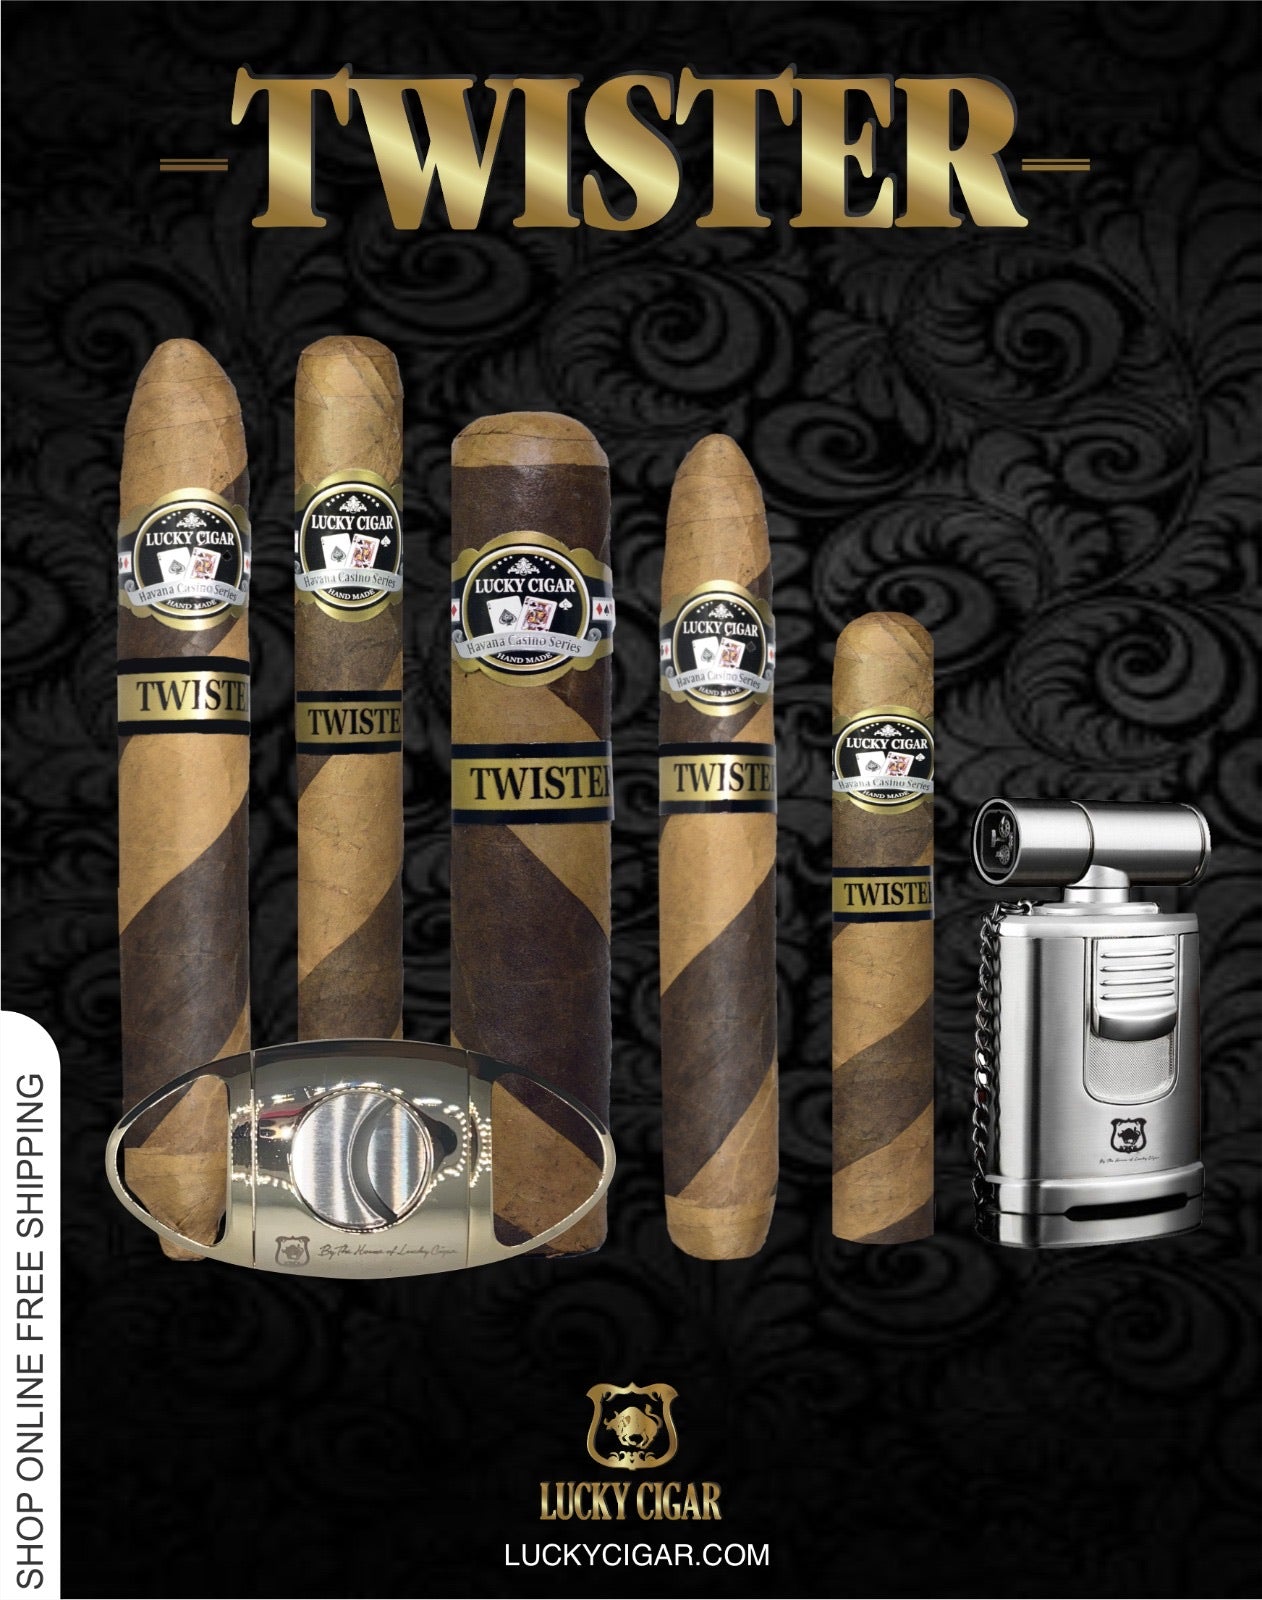 Lucky Cigar Sampler Sets: Set of 5 Twister Cigars with Cutter, Desk Torch